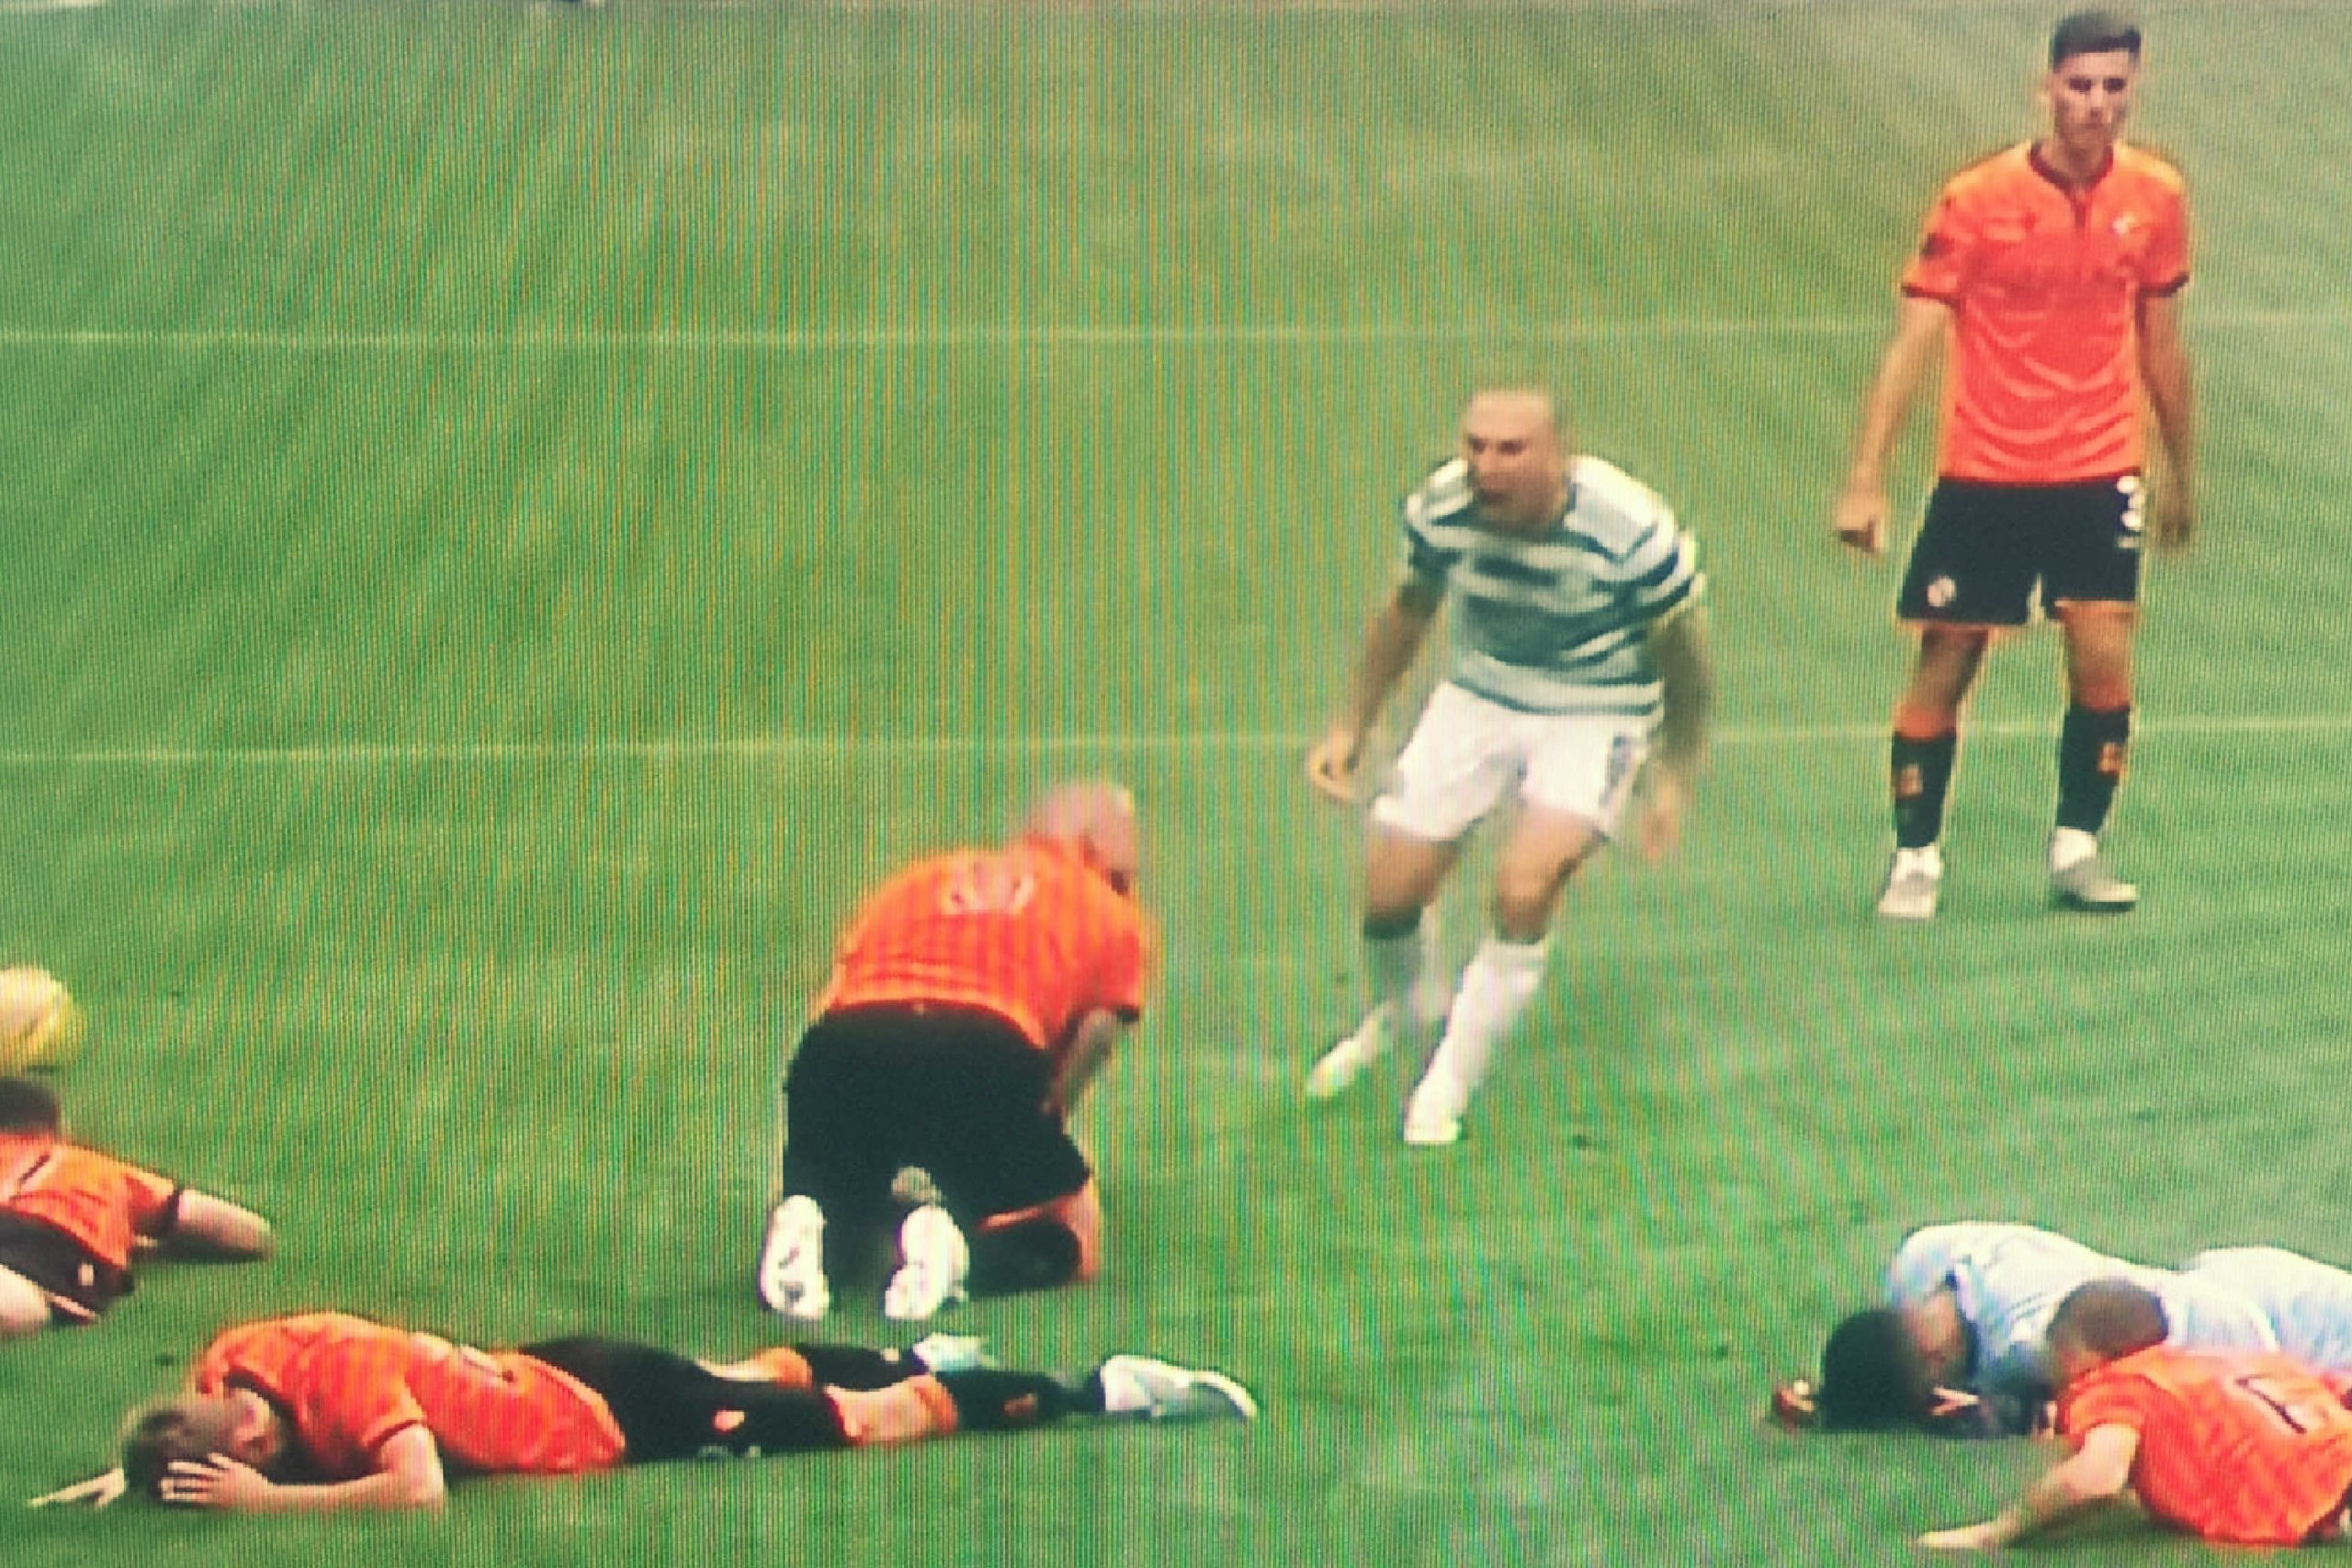 Scott Brown in Mark Conolly’s face after Albian Ajeti put Celtic ahead v Dundee United